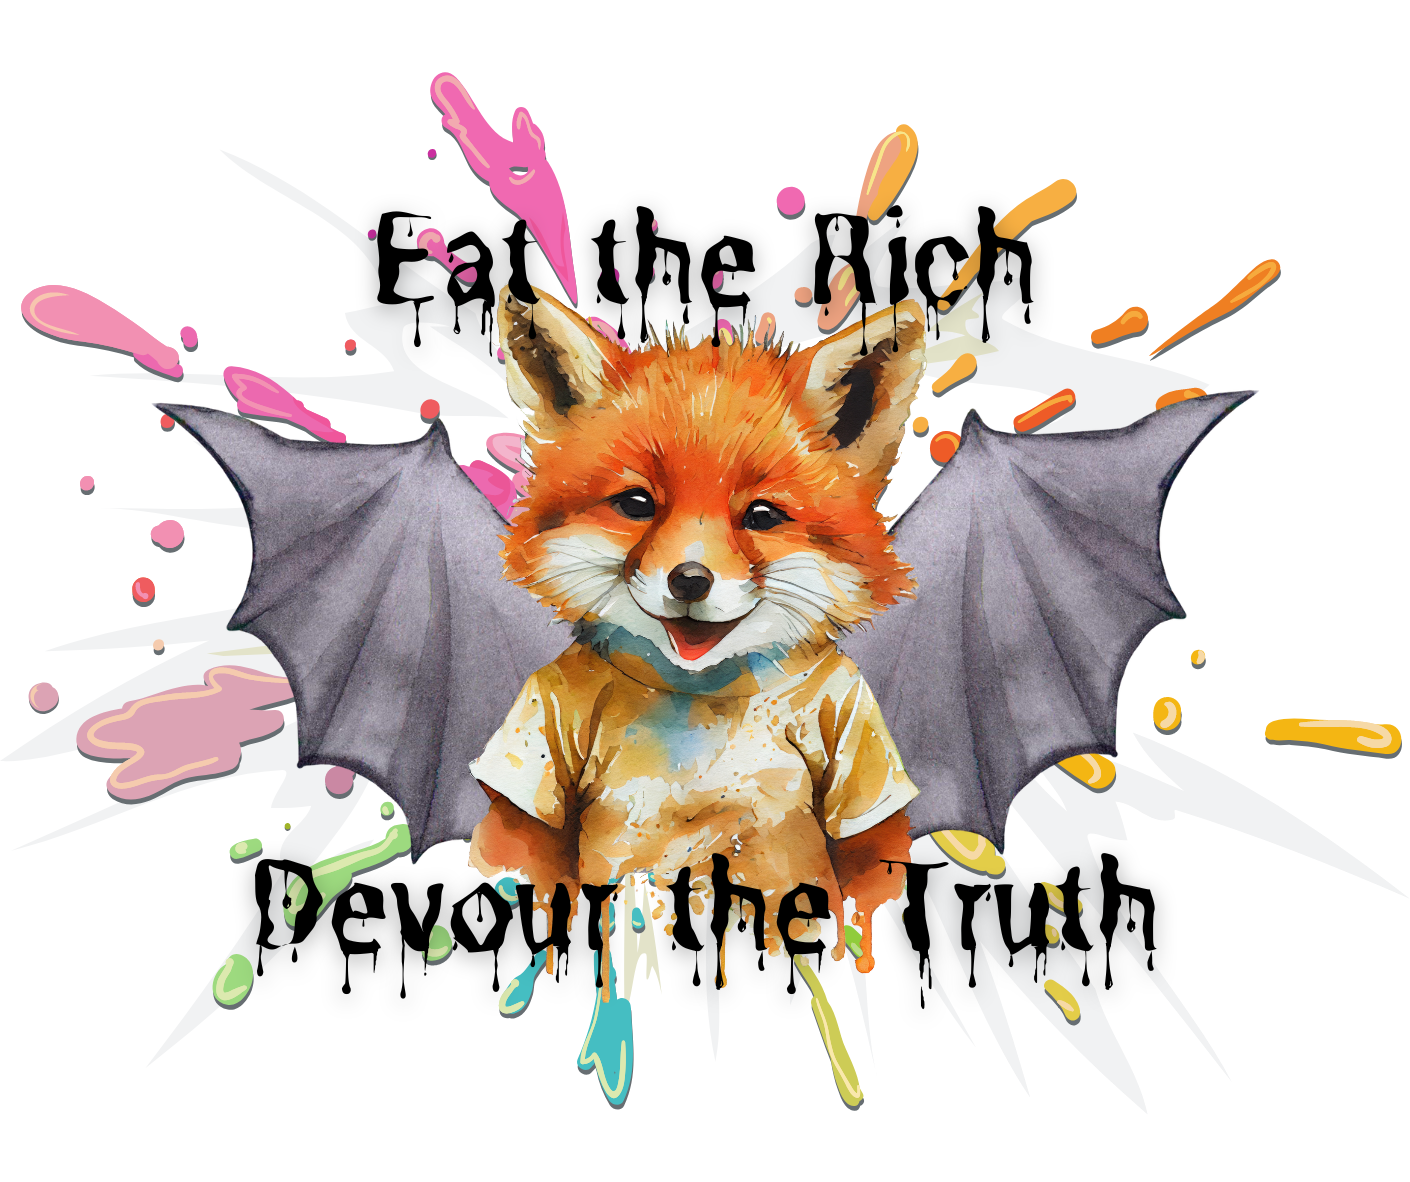 An adorably vicious Winged Sand Fox, wearing what looks like a traditional glass-blower's smock, is portrayed with smoke black wings against a background splashed with color. Above, it reads eat the rich. Below, it reads devour the truth.